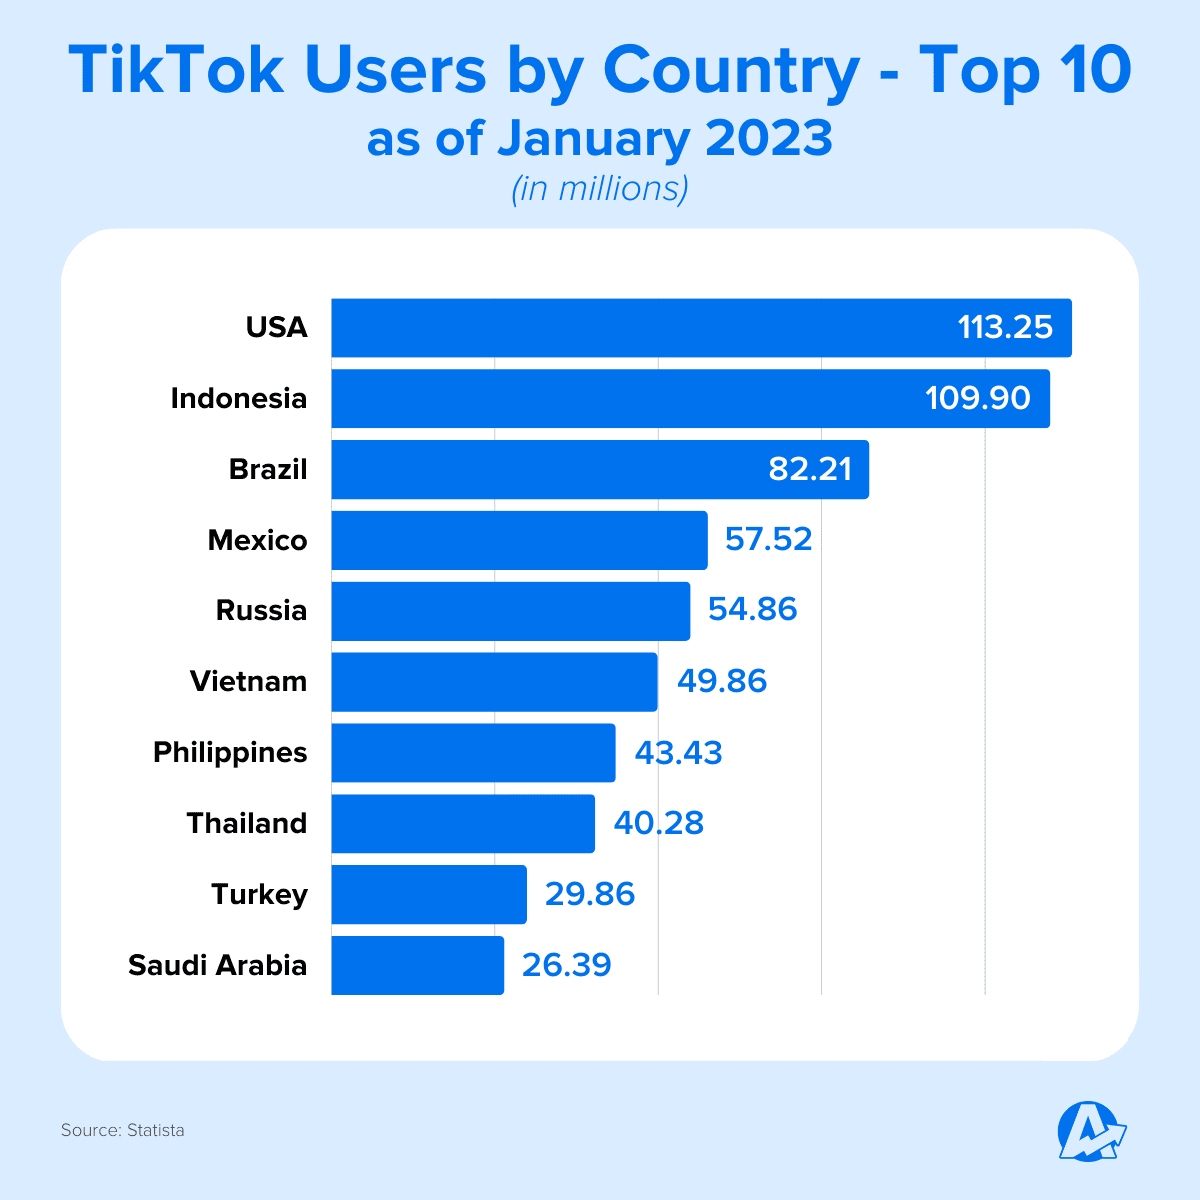 Top 10 TikTok Users by Country in 2023